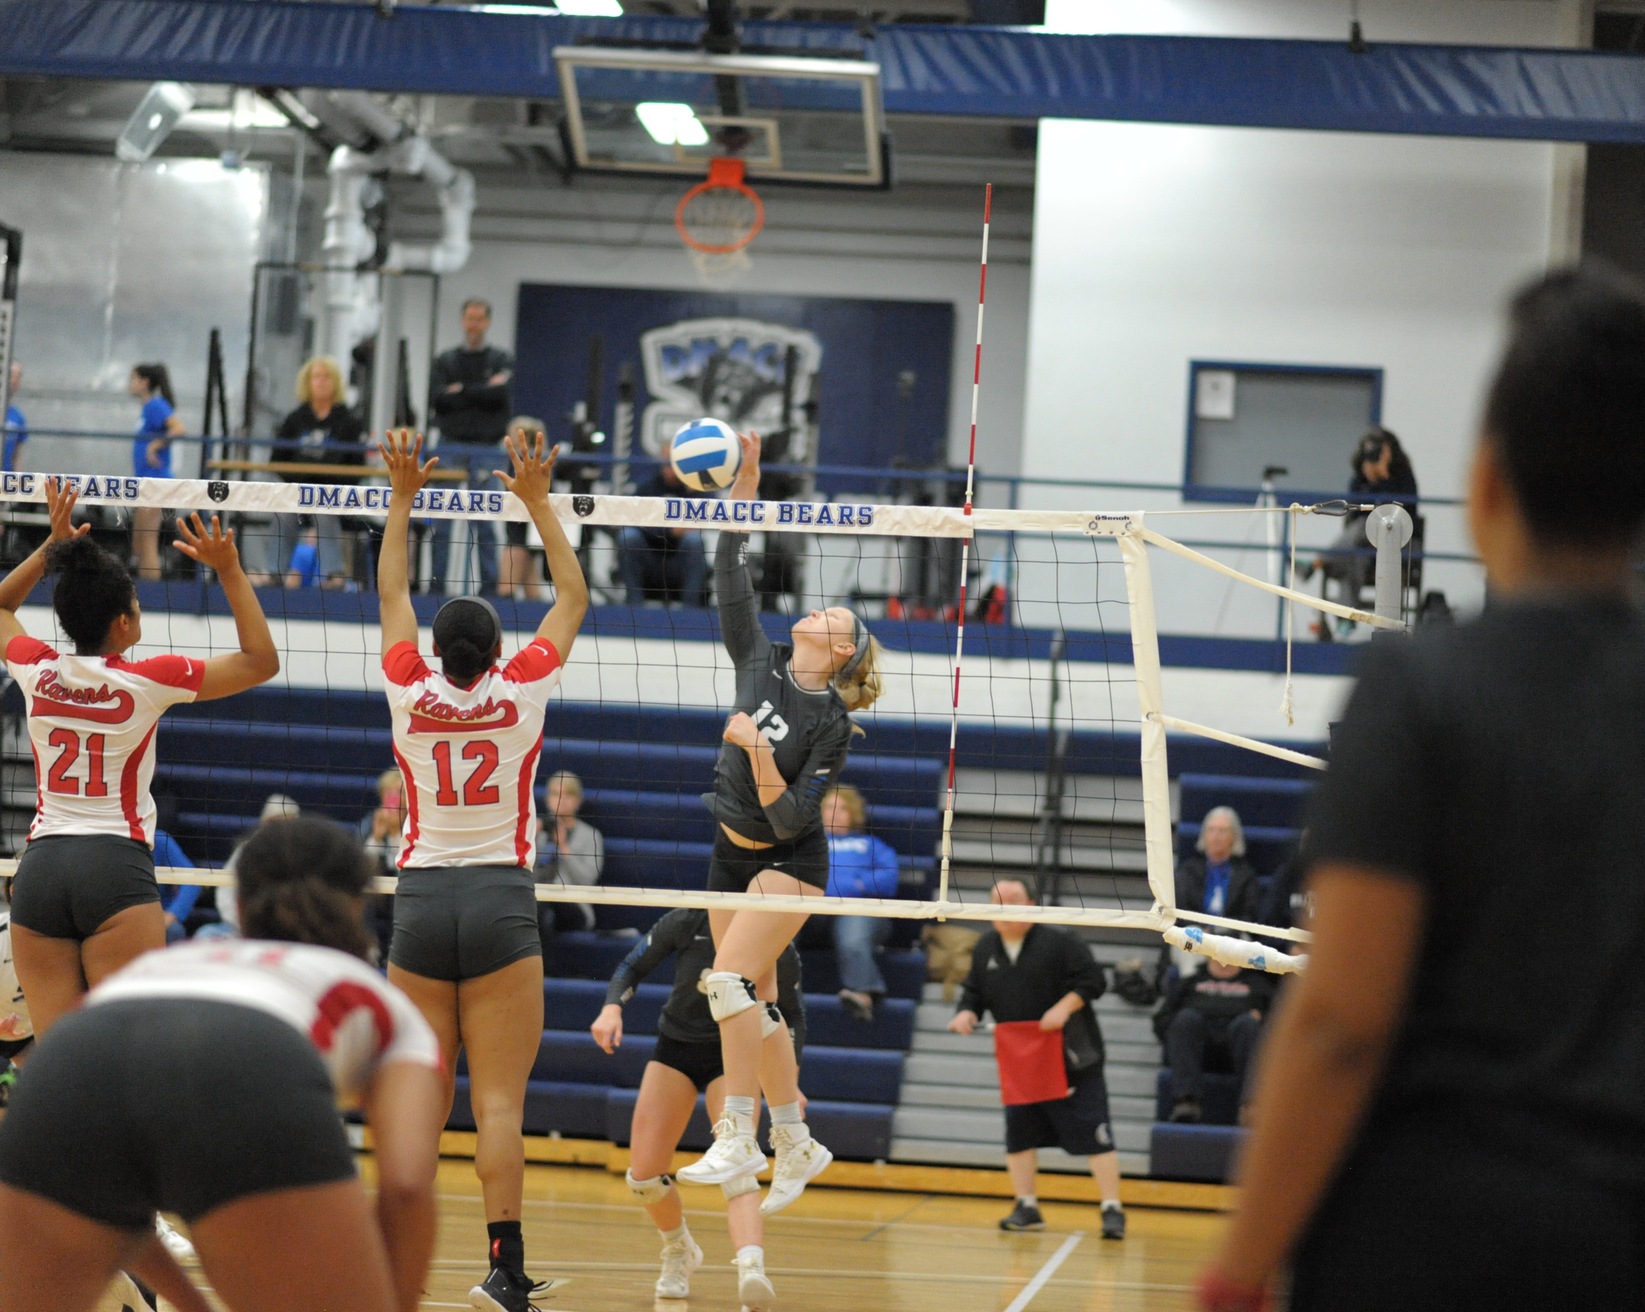 DMACC Volleyball Team Drops Three of Four Matches in DMACC Invitational